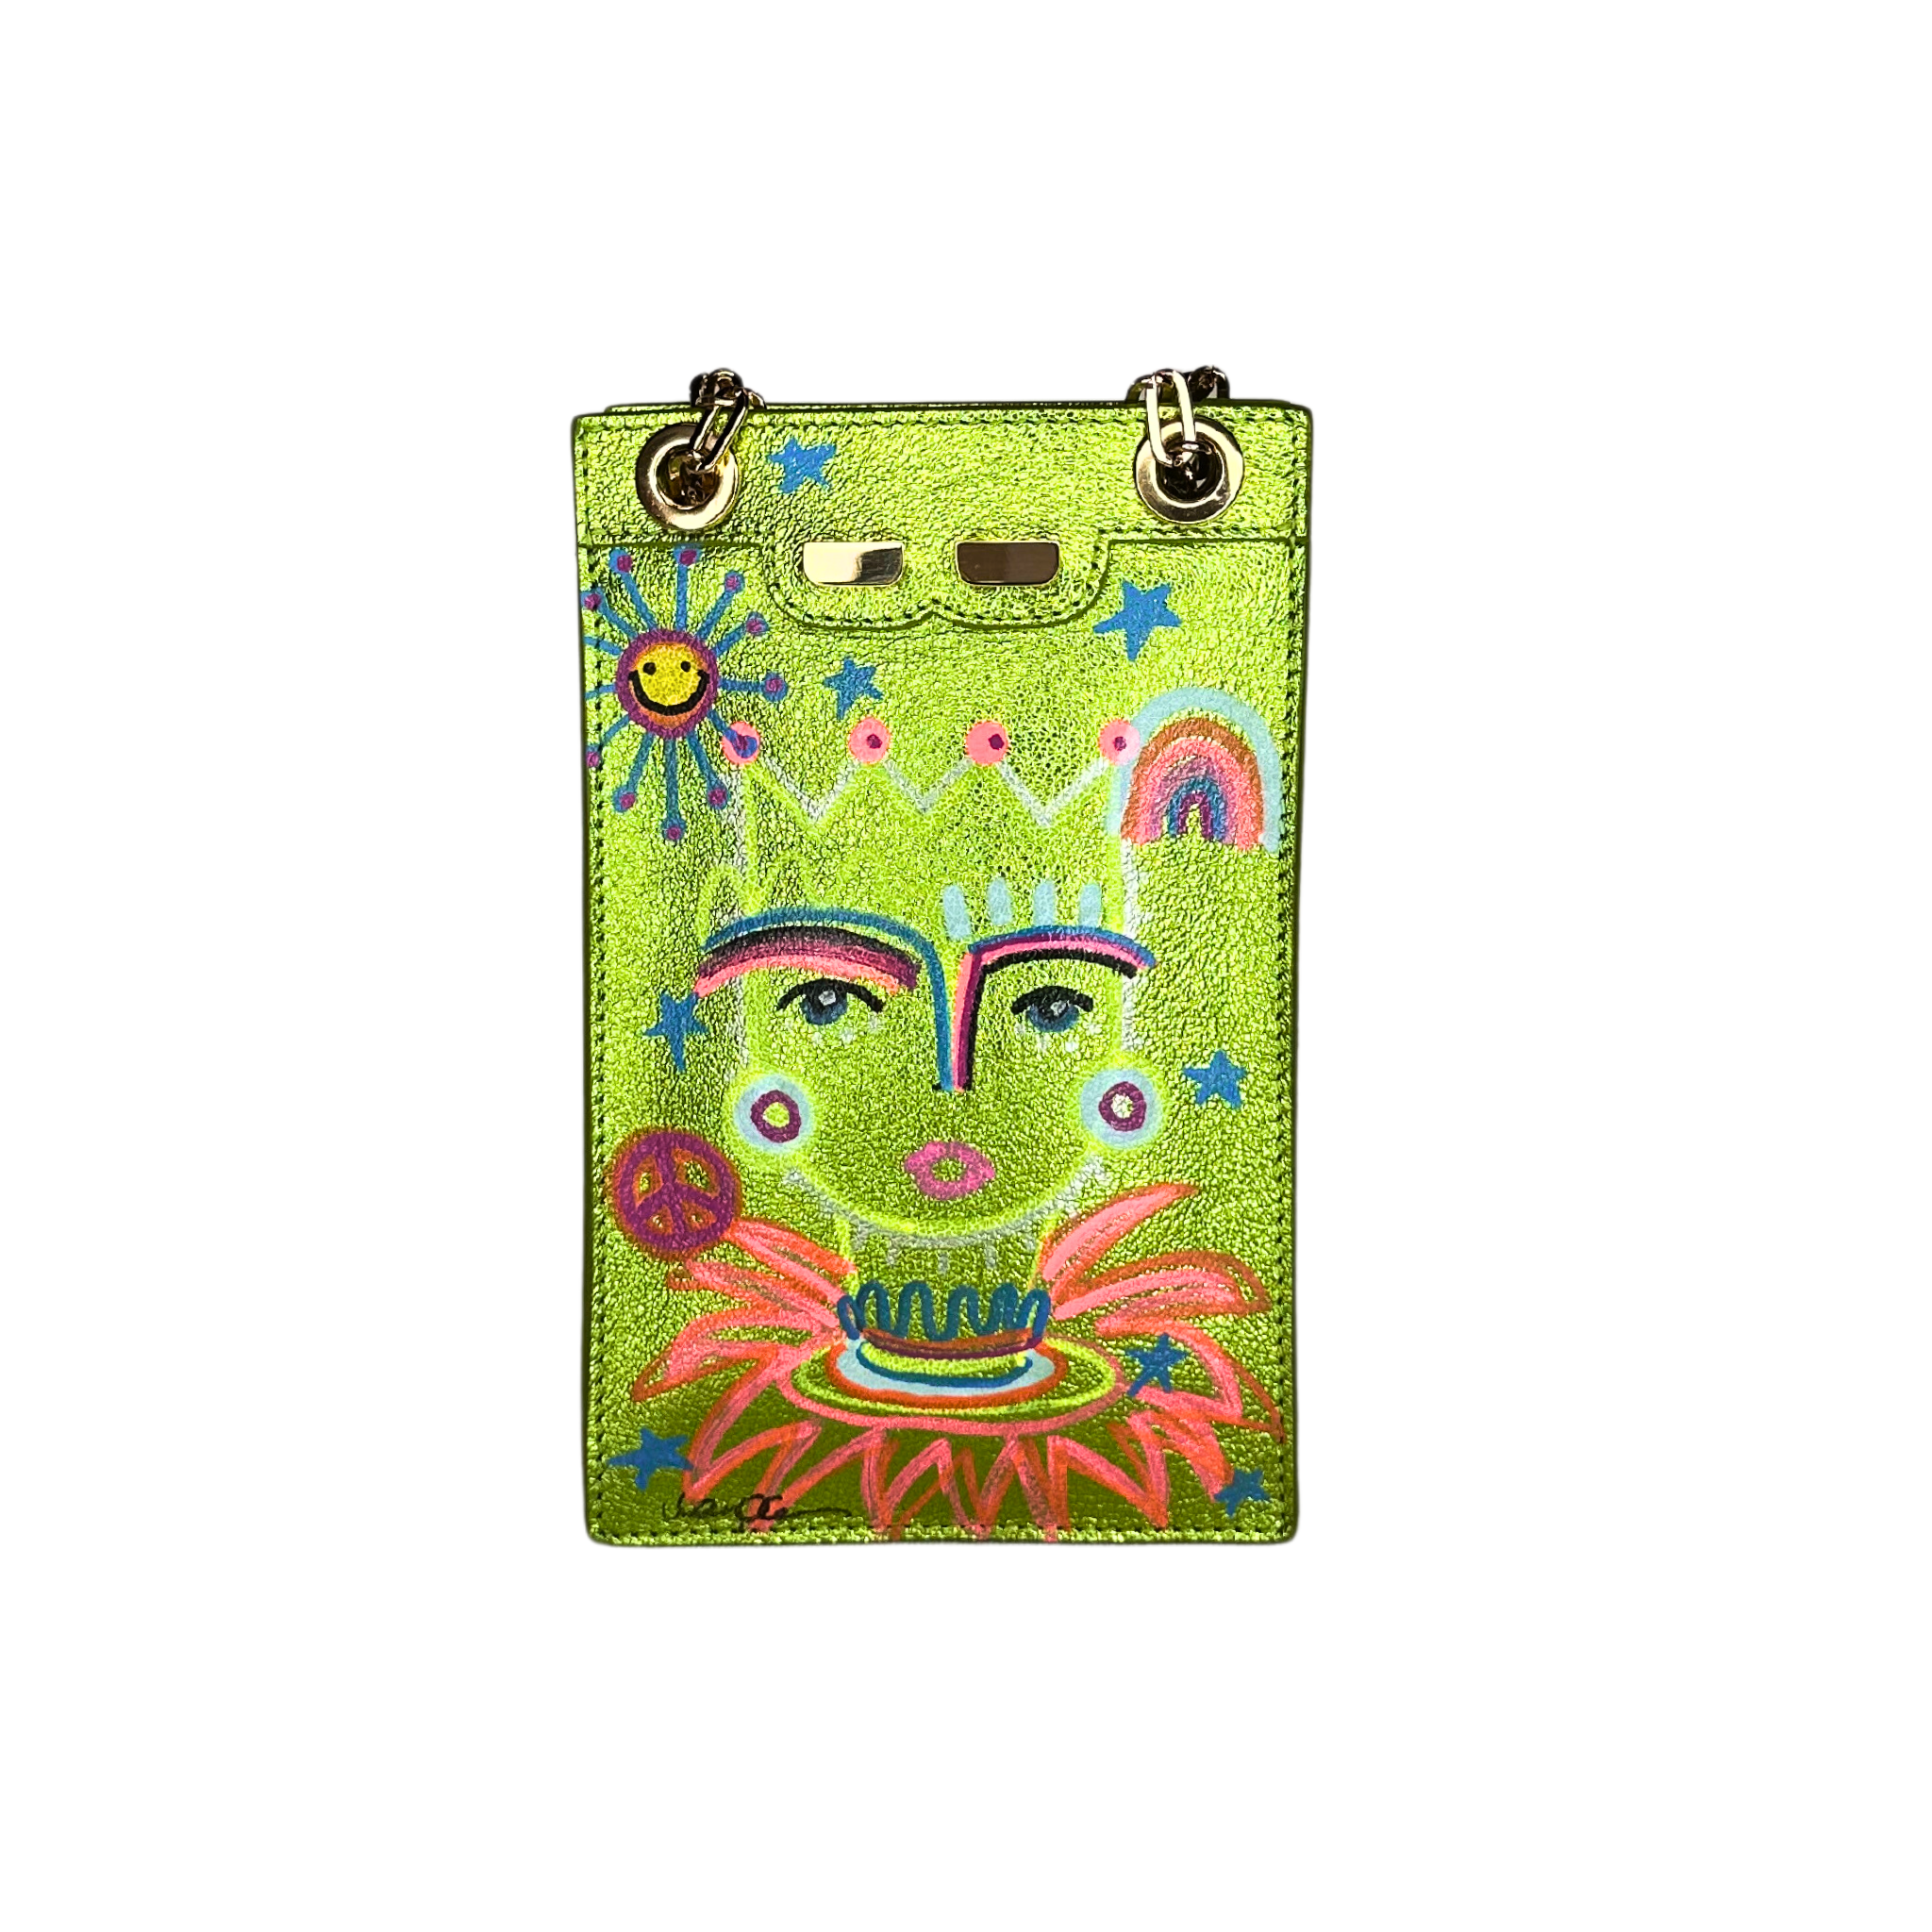 Catherine Cellphone Pouch in Metallic Lime